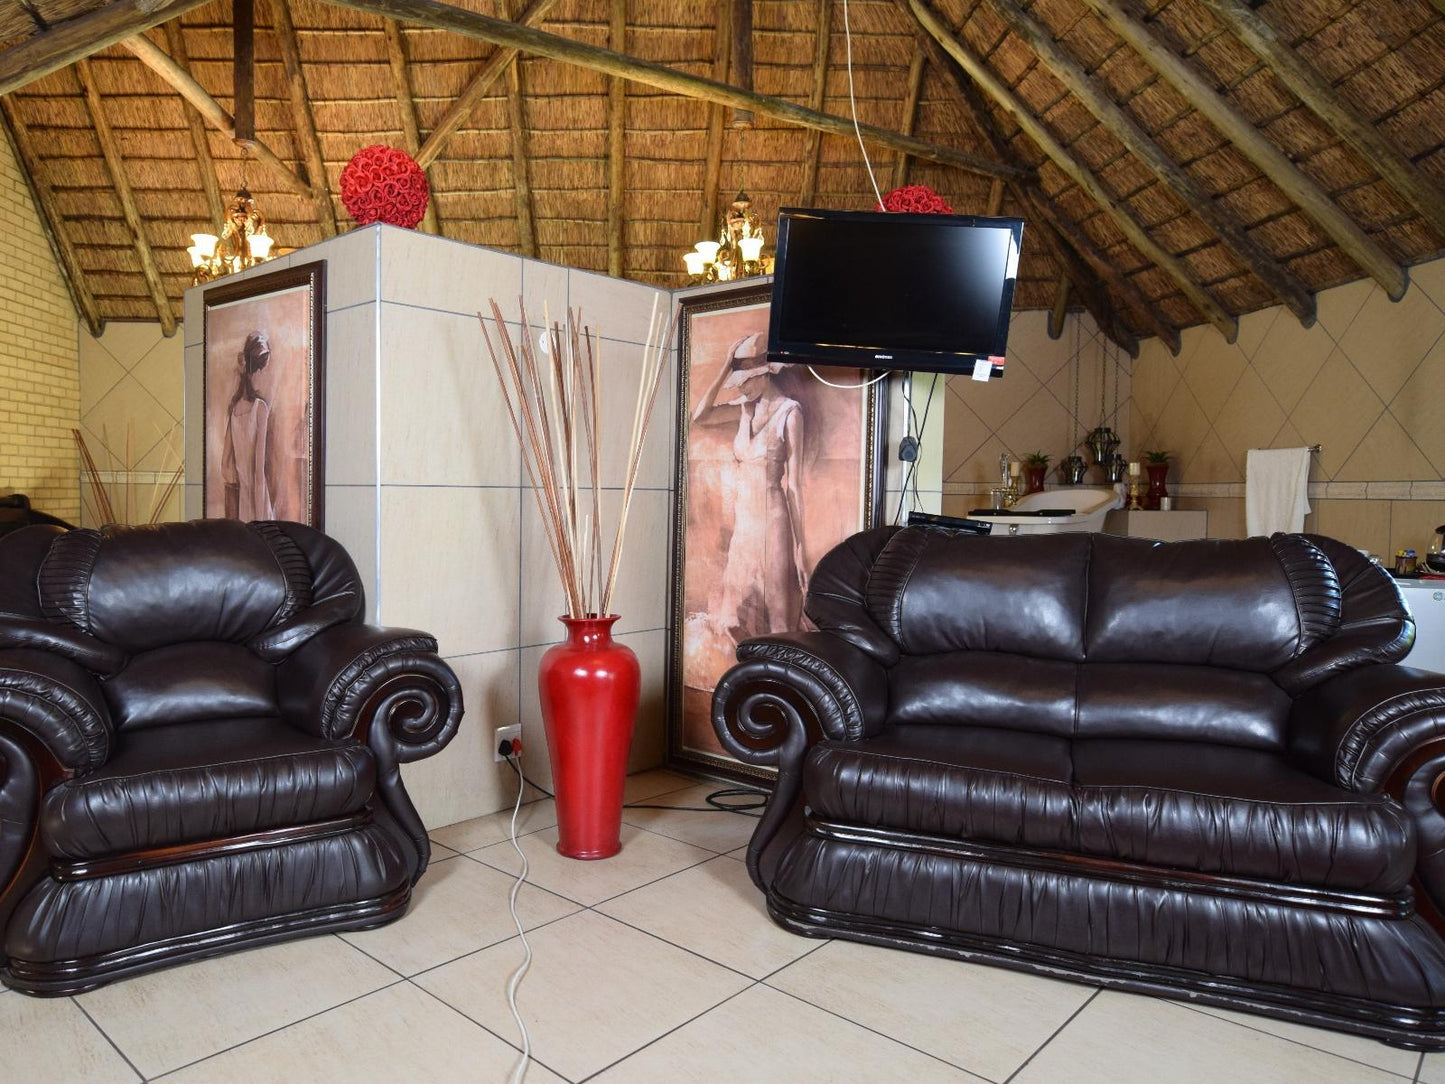 Deluxe King Room 1 @ Accommodation At Thabong Venue